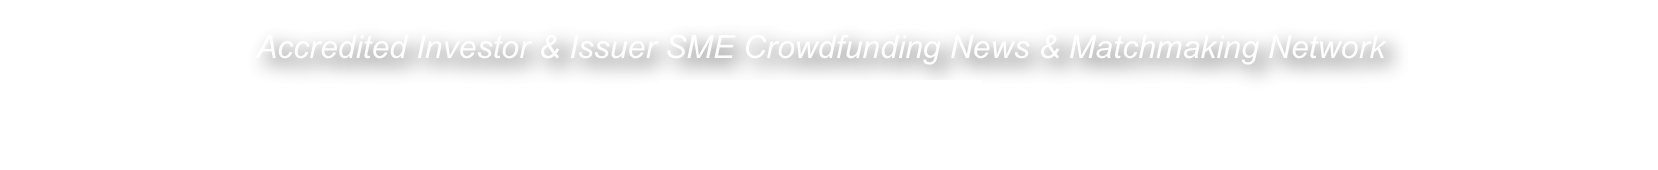 Accredited Investor & Issuer SME Crowdfunding News & Matchmaking Network  www.CrowdNewsNet.com   